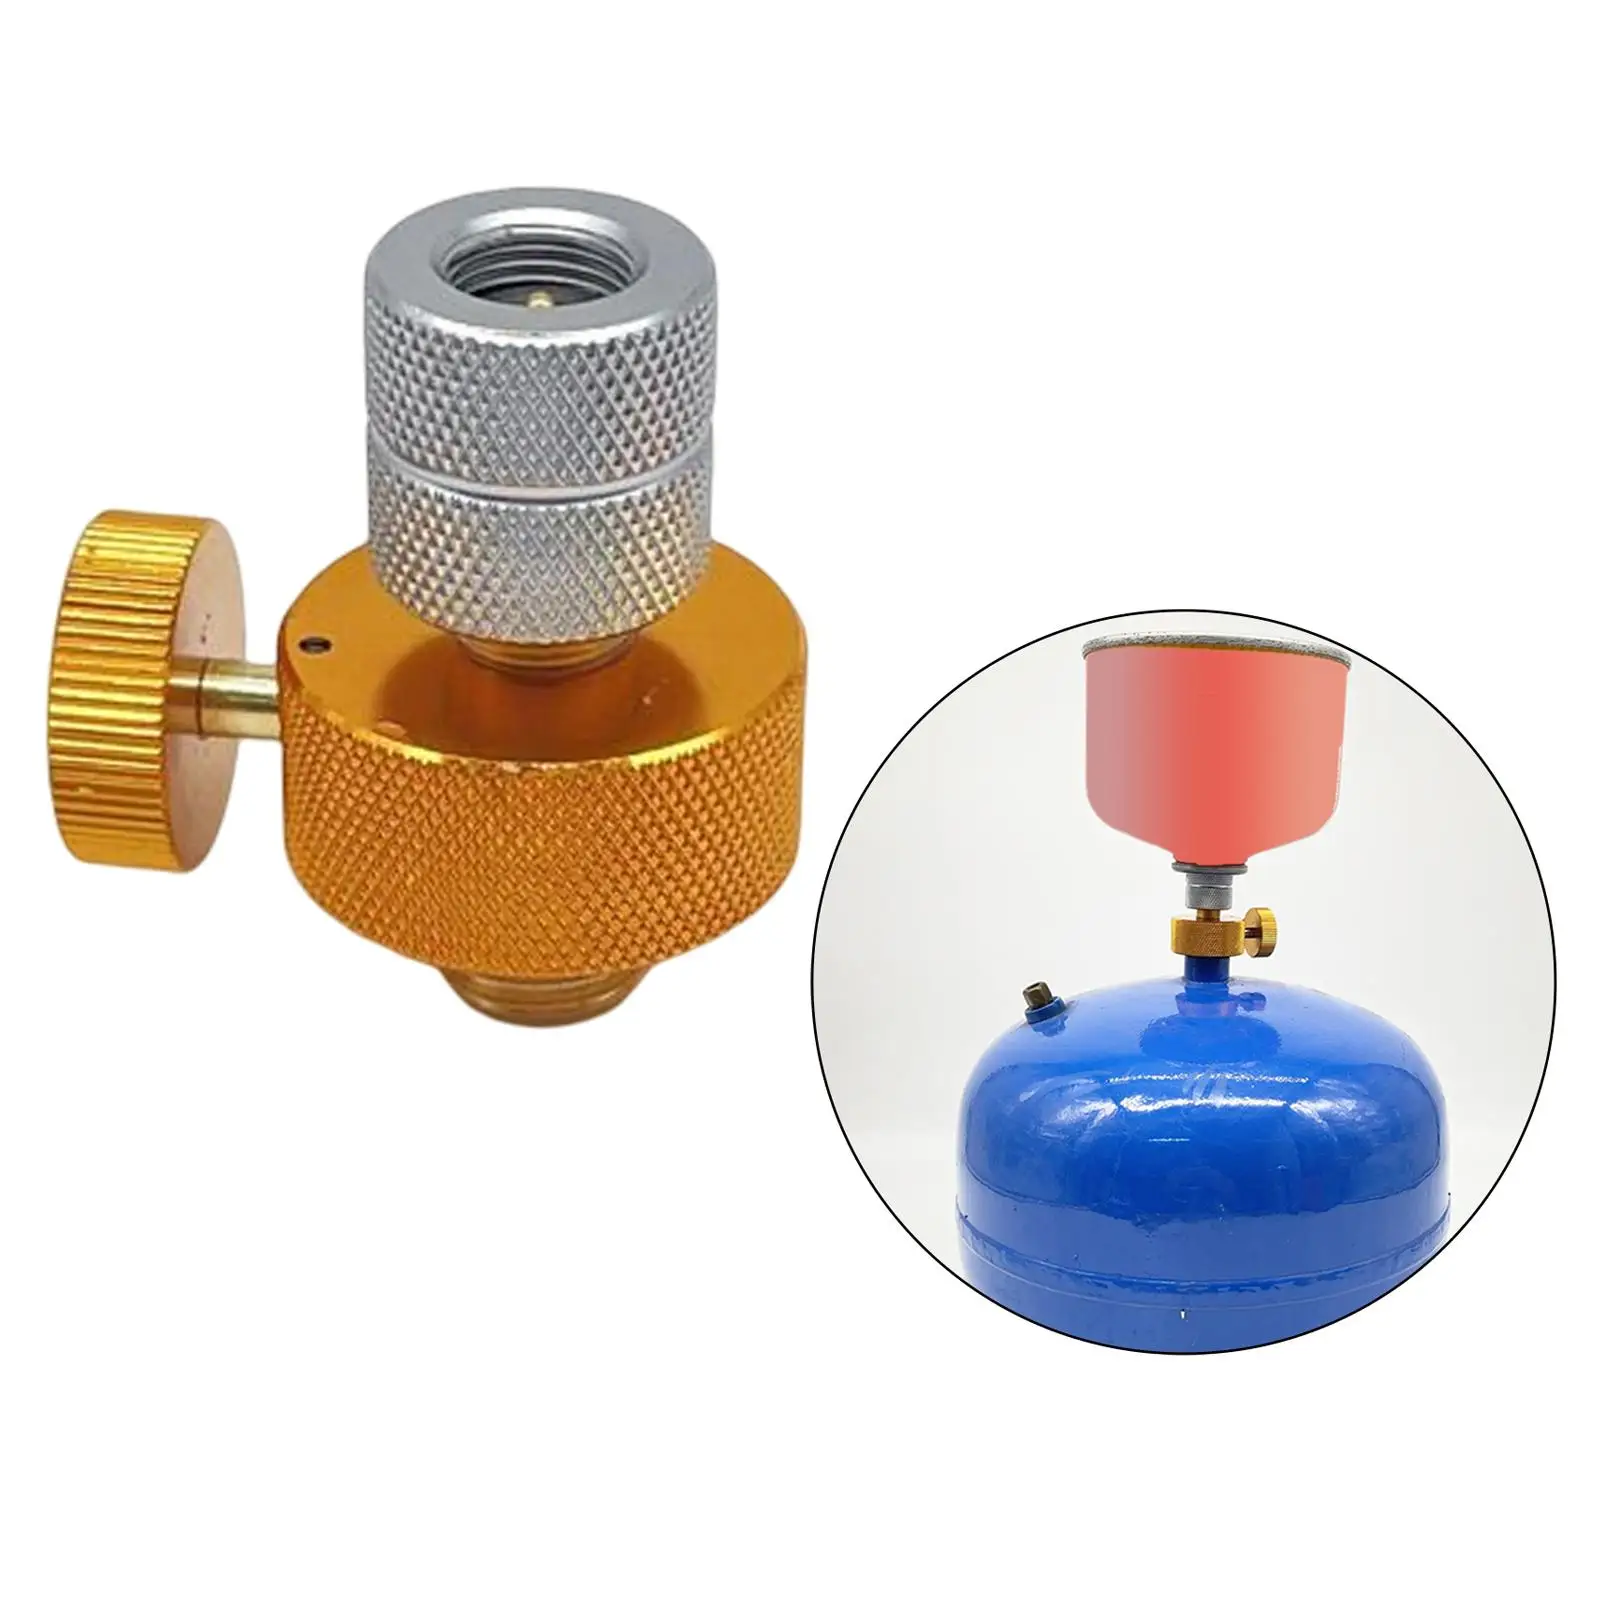 Outdoor Gas Tank Adapter Furnace Connector Cylinder Tank Gas Filling Adapter for Camping Gas Filling Fuel Tank Canister BBQ